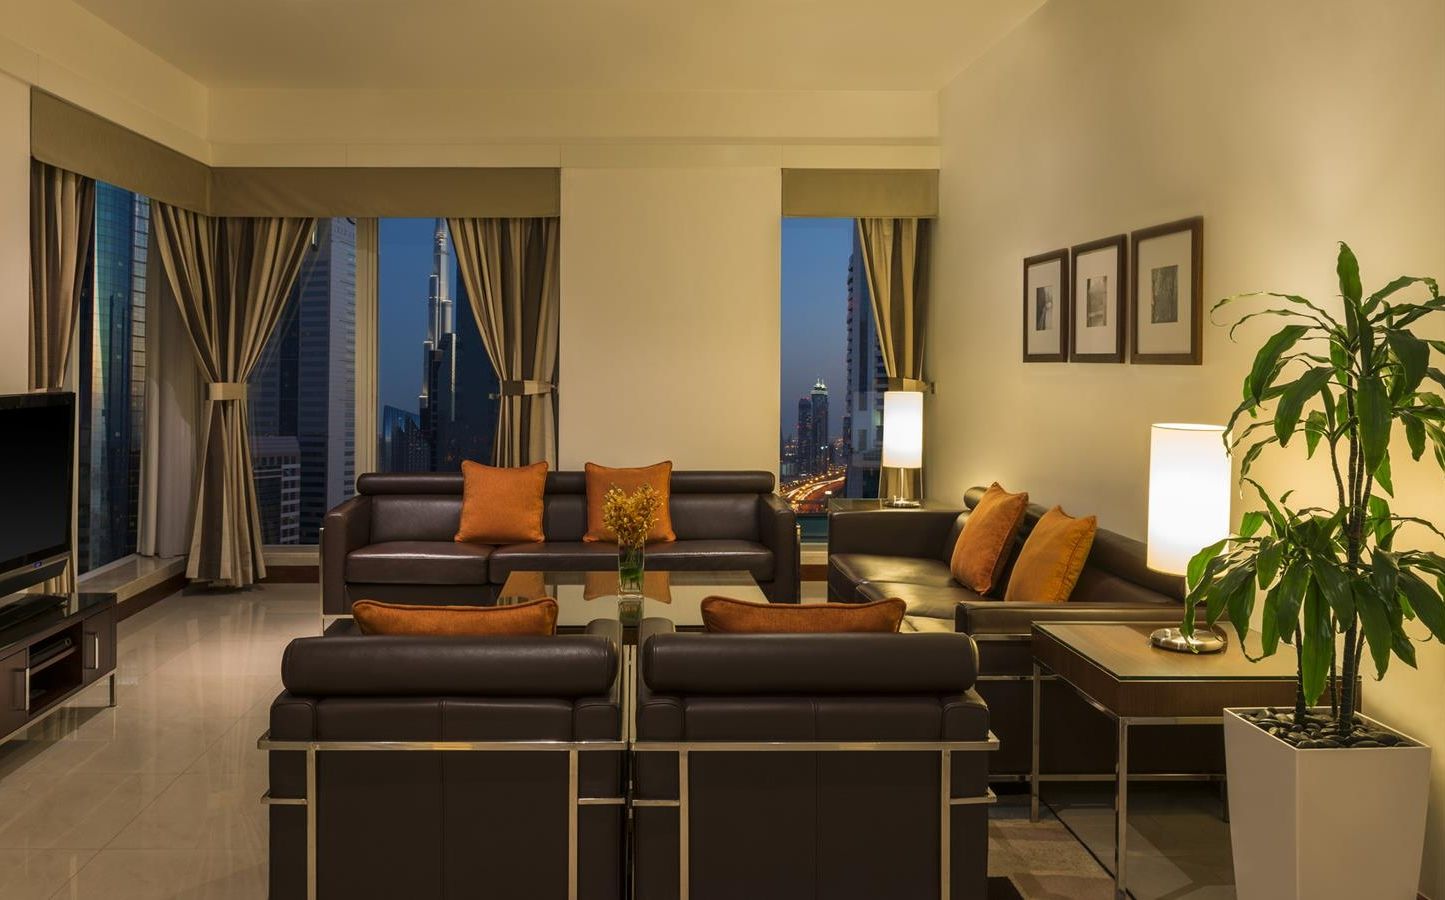 Hotel Apartments Sheikh Zayed Road 2 Bedroom Apartments